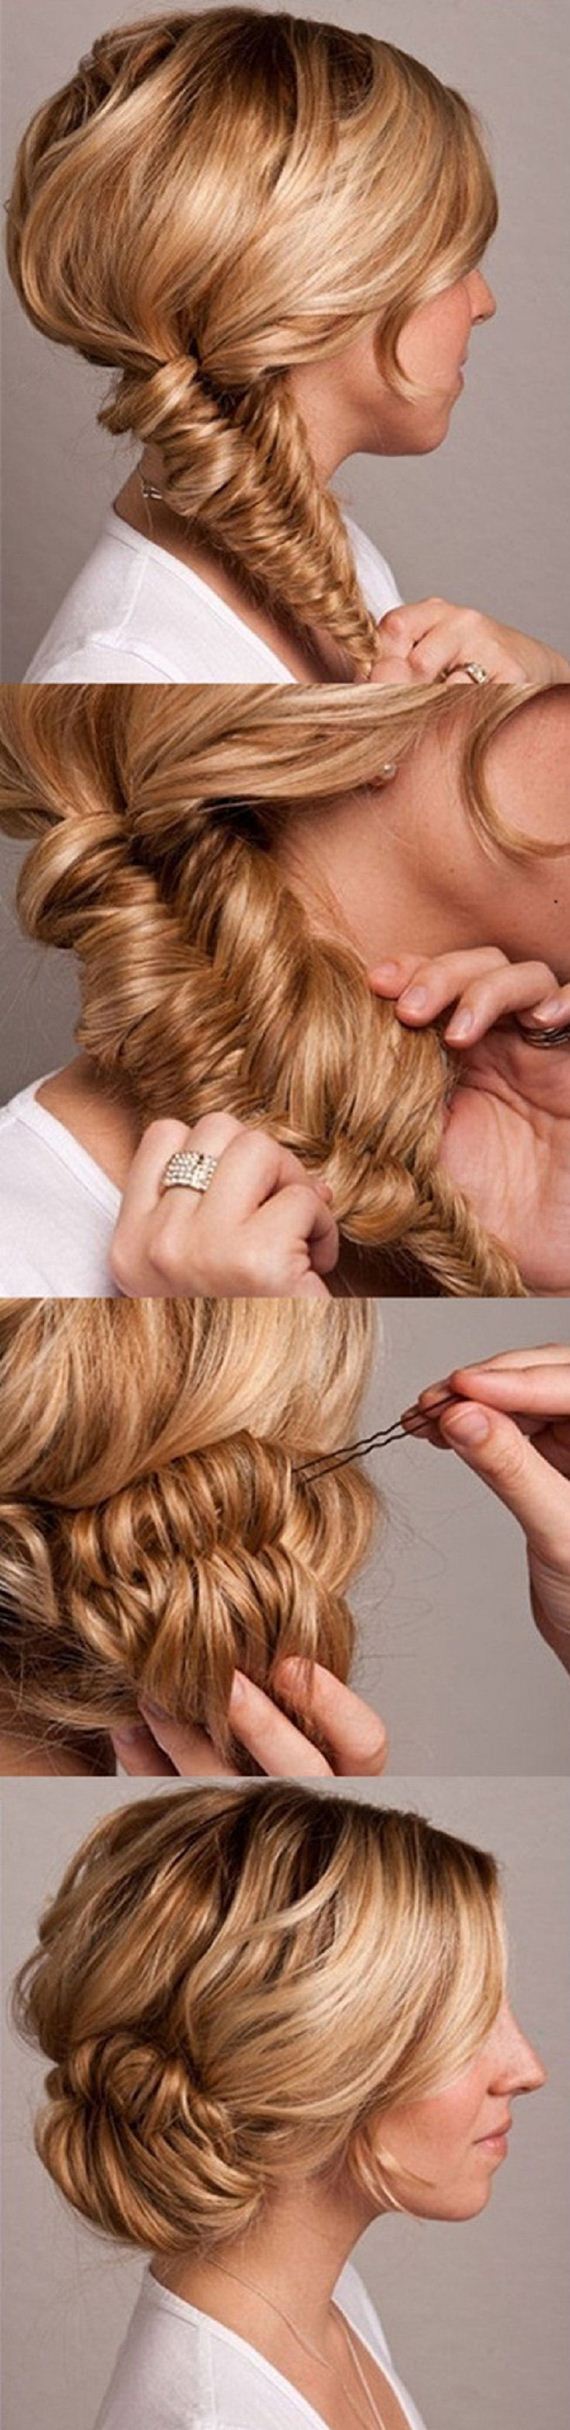 04-Quick-And-Easy-Hair-Buns